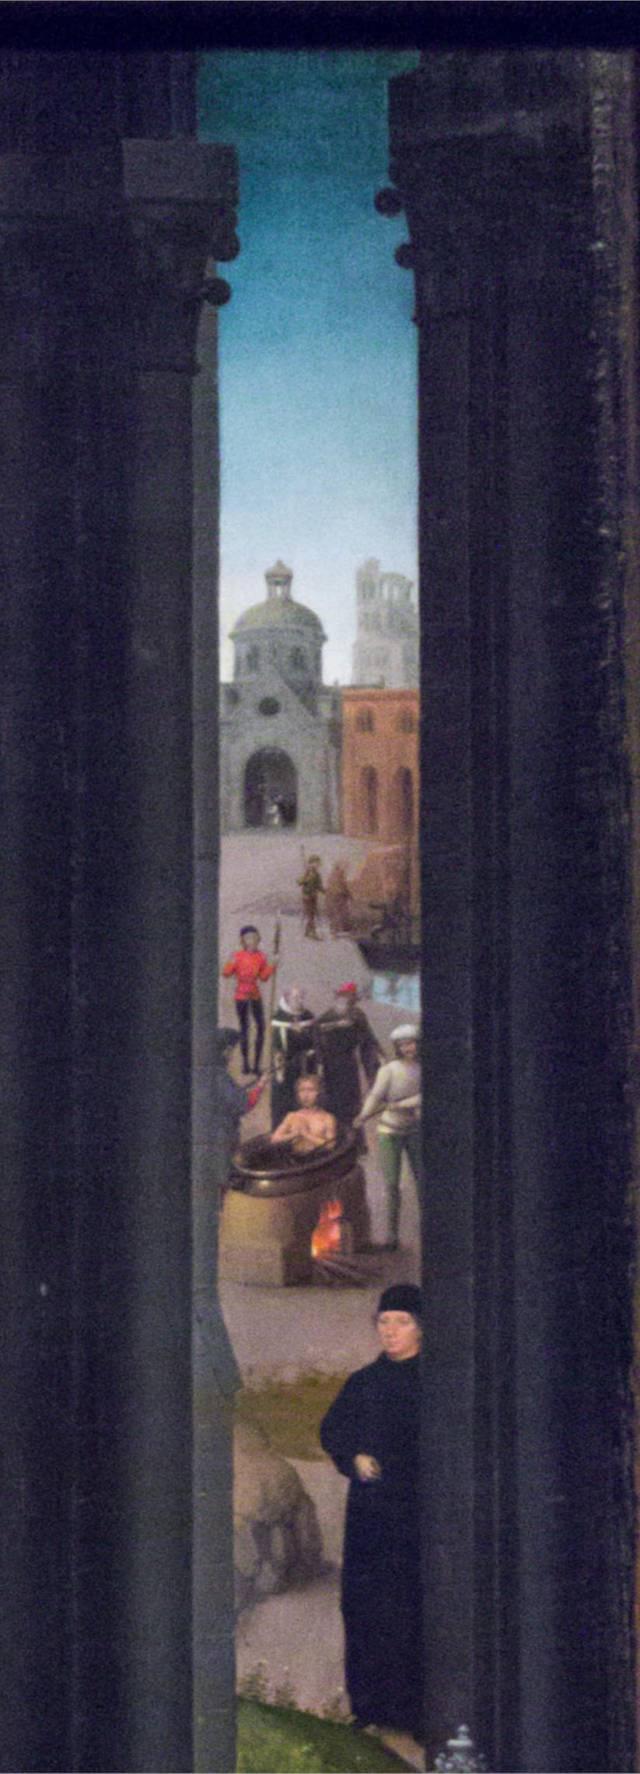 Hans MEMLING, “Triptych of John the Baptist and John the Evangelist”, detail of the central panel, “Salding of John the Evangelist by order of Emperor Domitian in front of the Latin Gate in Rome and departure for exile in the island of Patmos”, Memling Museum, Old St. John's Hospital, Bruges (Brugge)